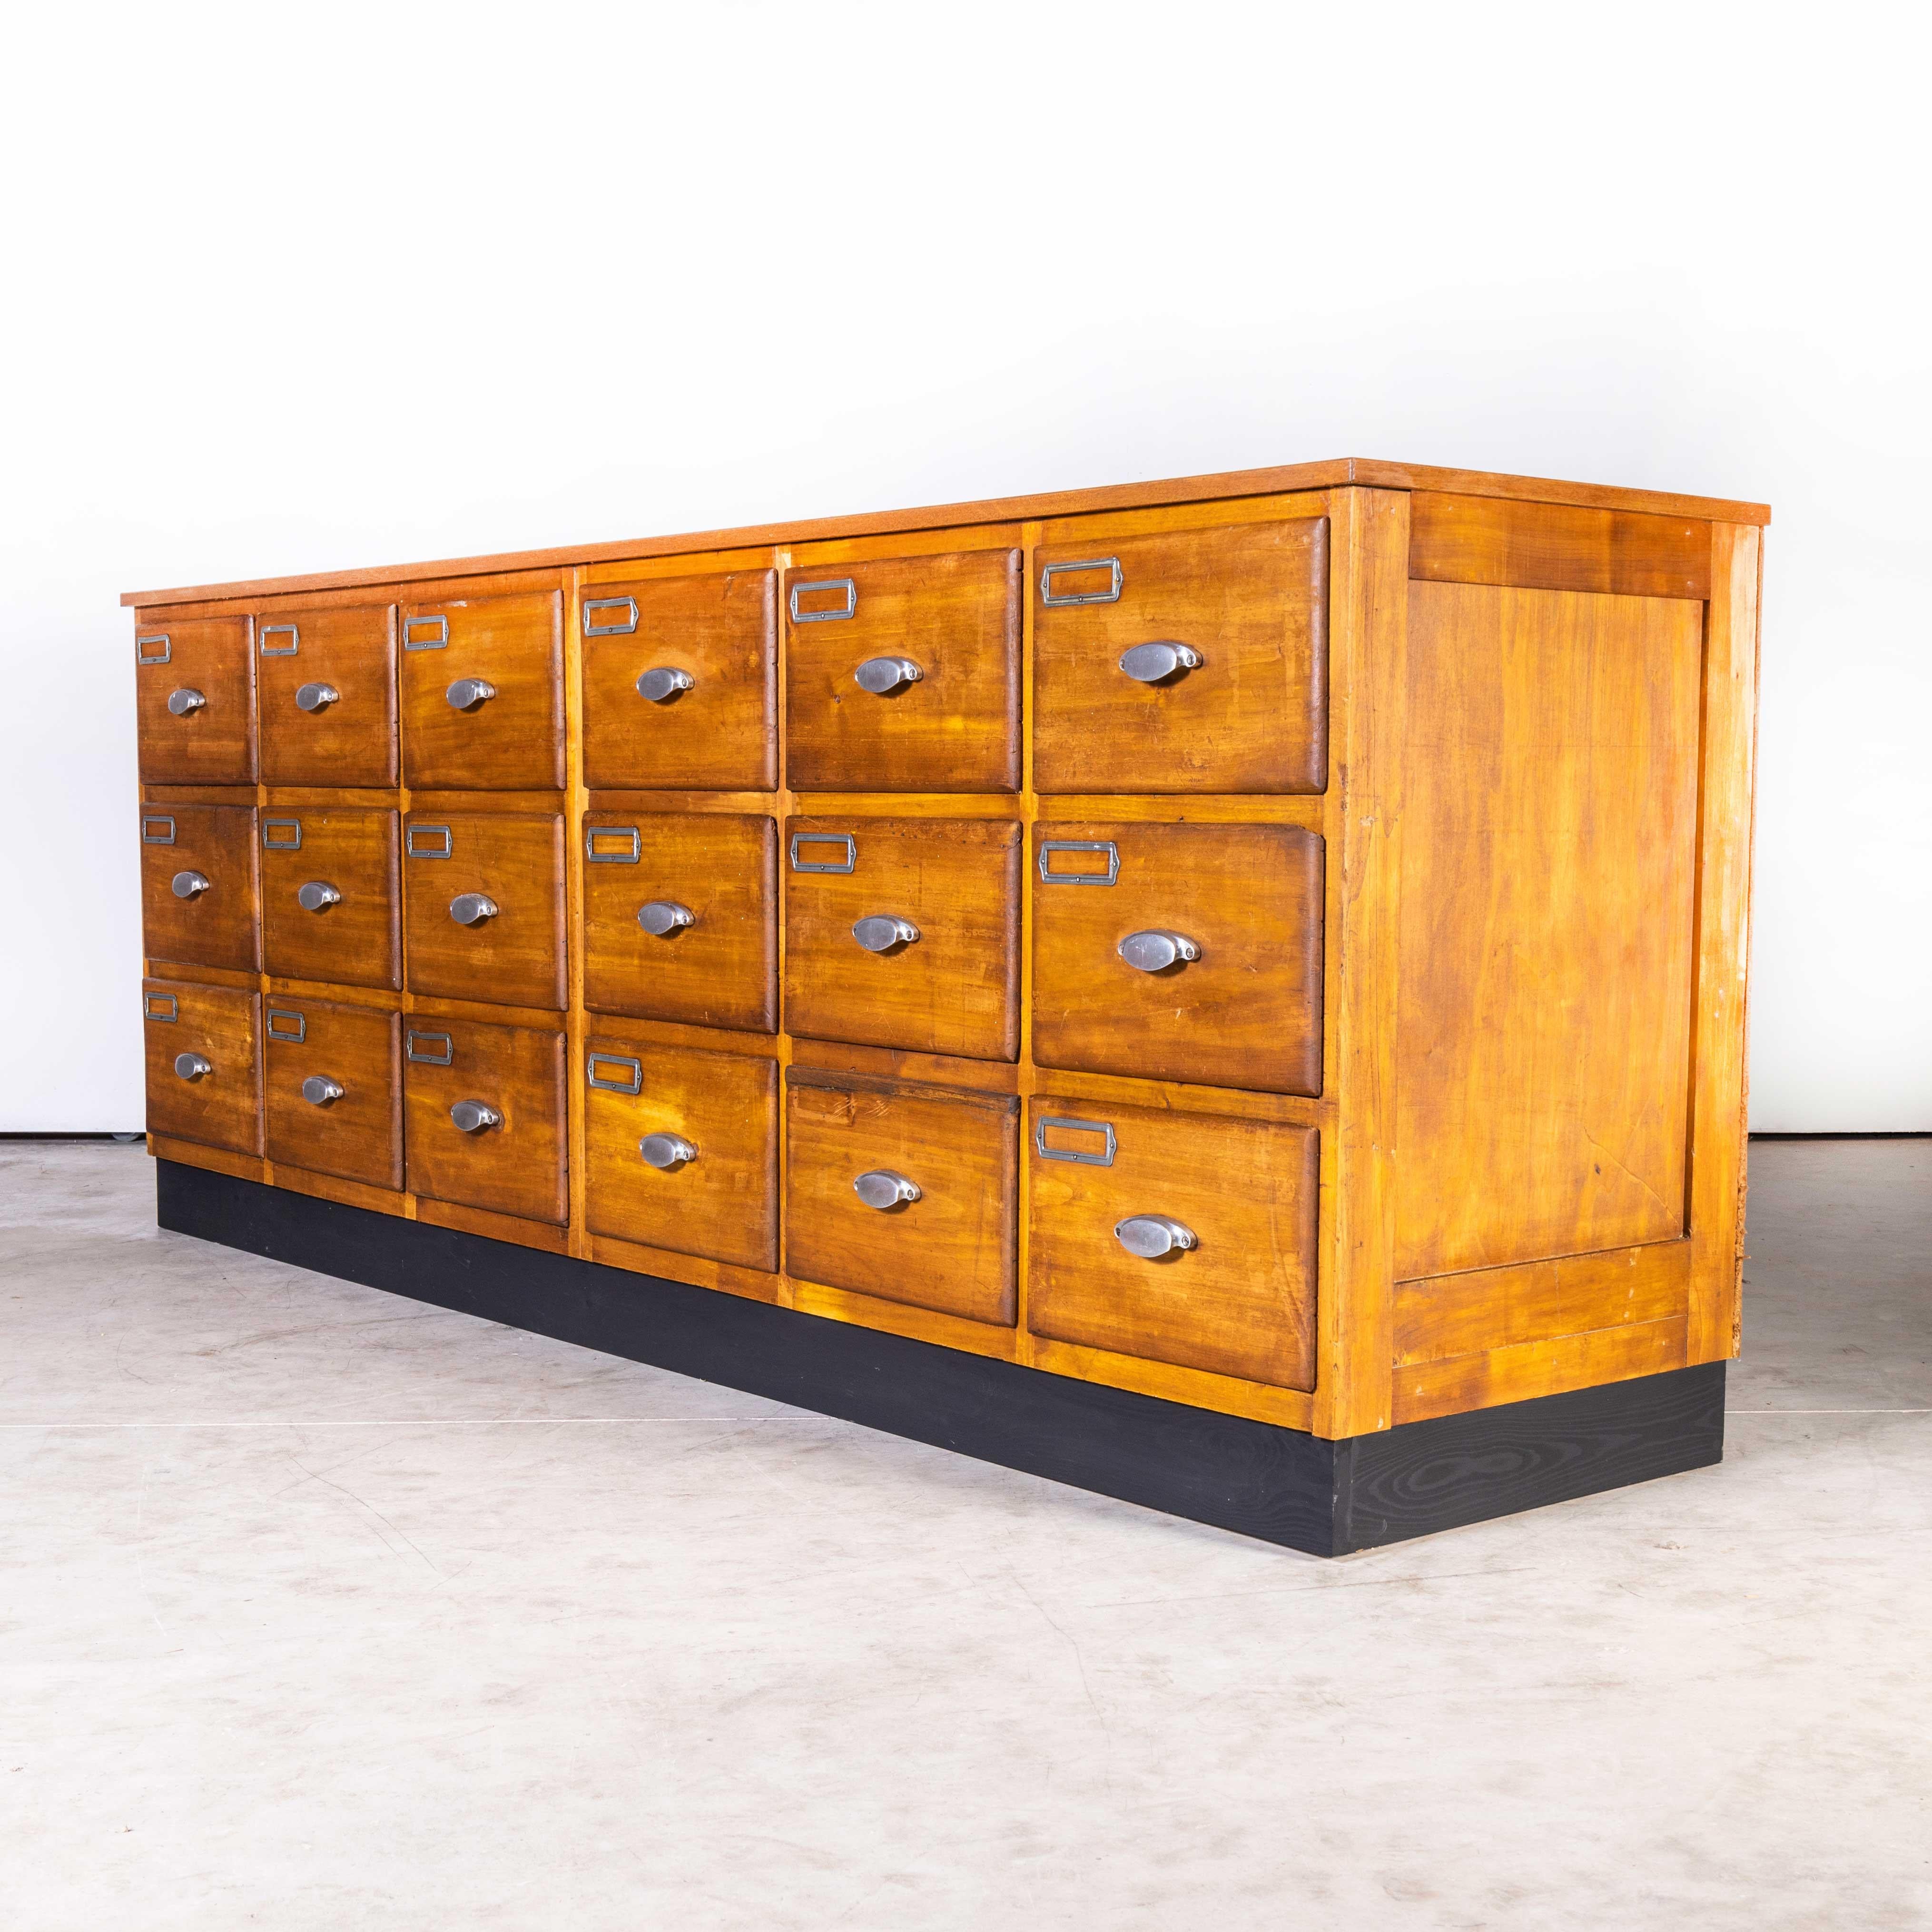 1950’s Belgian Twelve drawer bank of drawers
1950’s Belgian Twelve drawer bank of drawers. Sourced in Belgium this is a heavyweight high quality chest with six drawers. The carcass is made of birch with solid birch drawer fronts. The drawer boxes